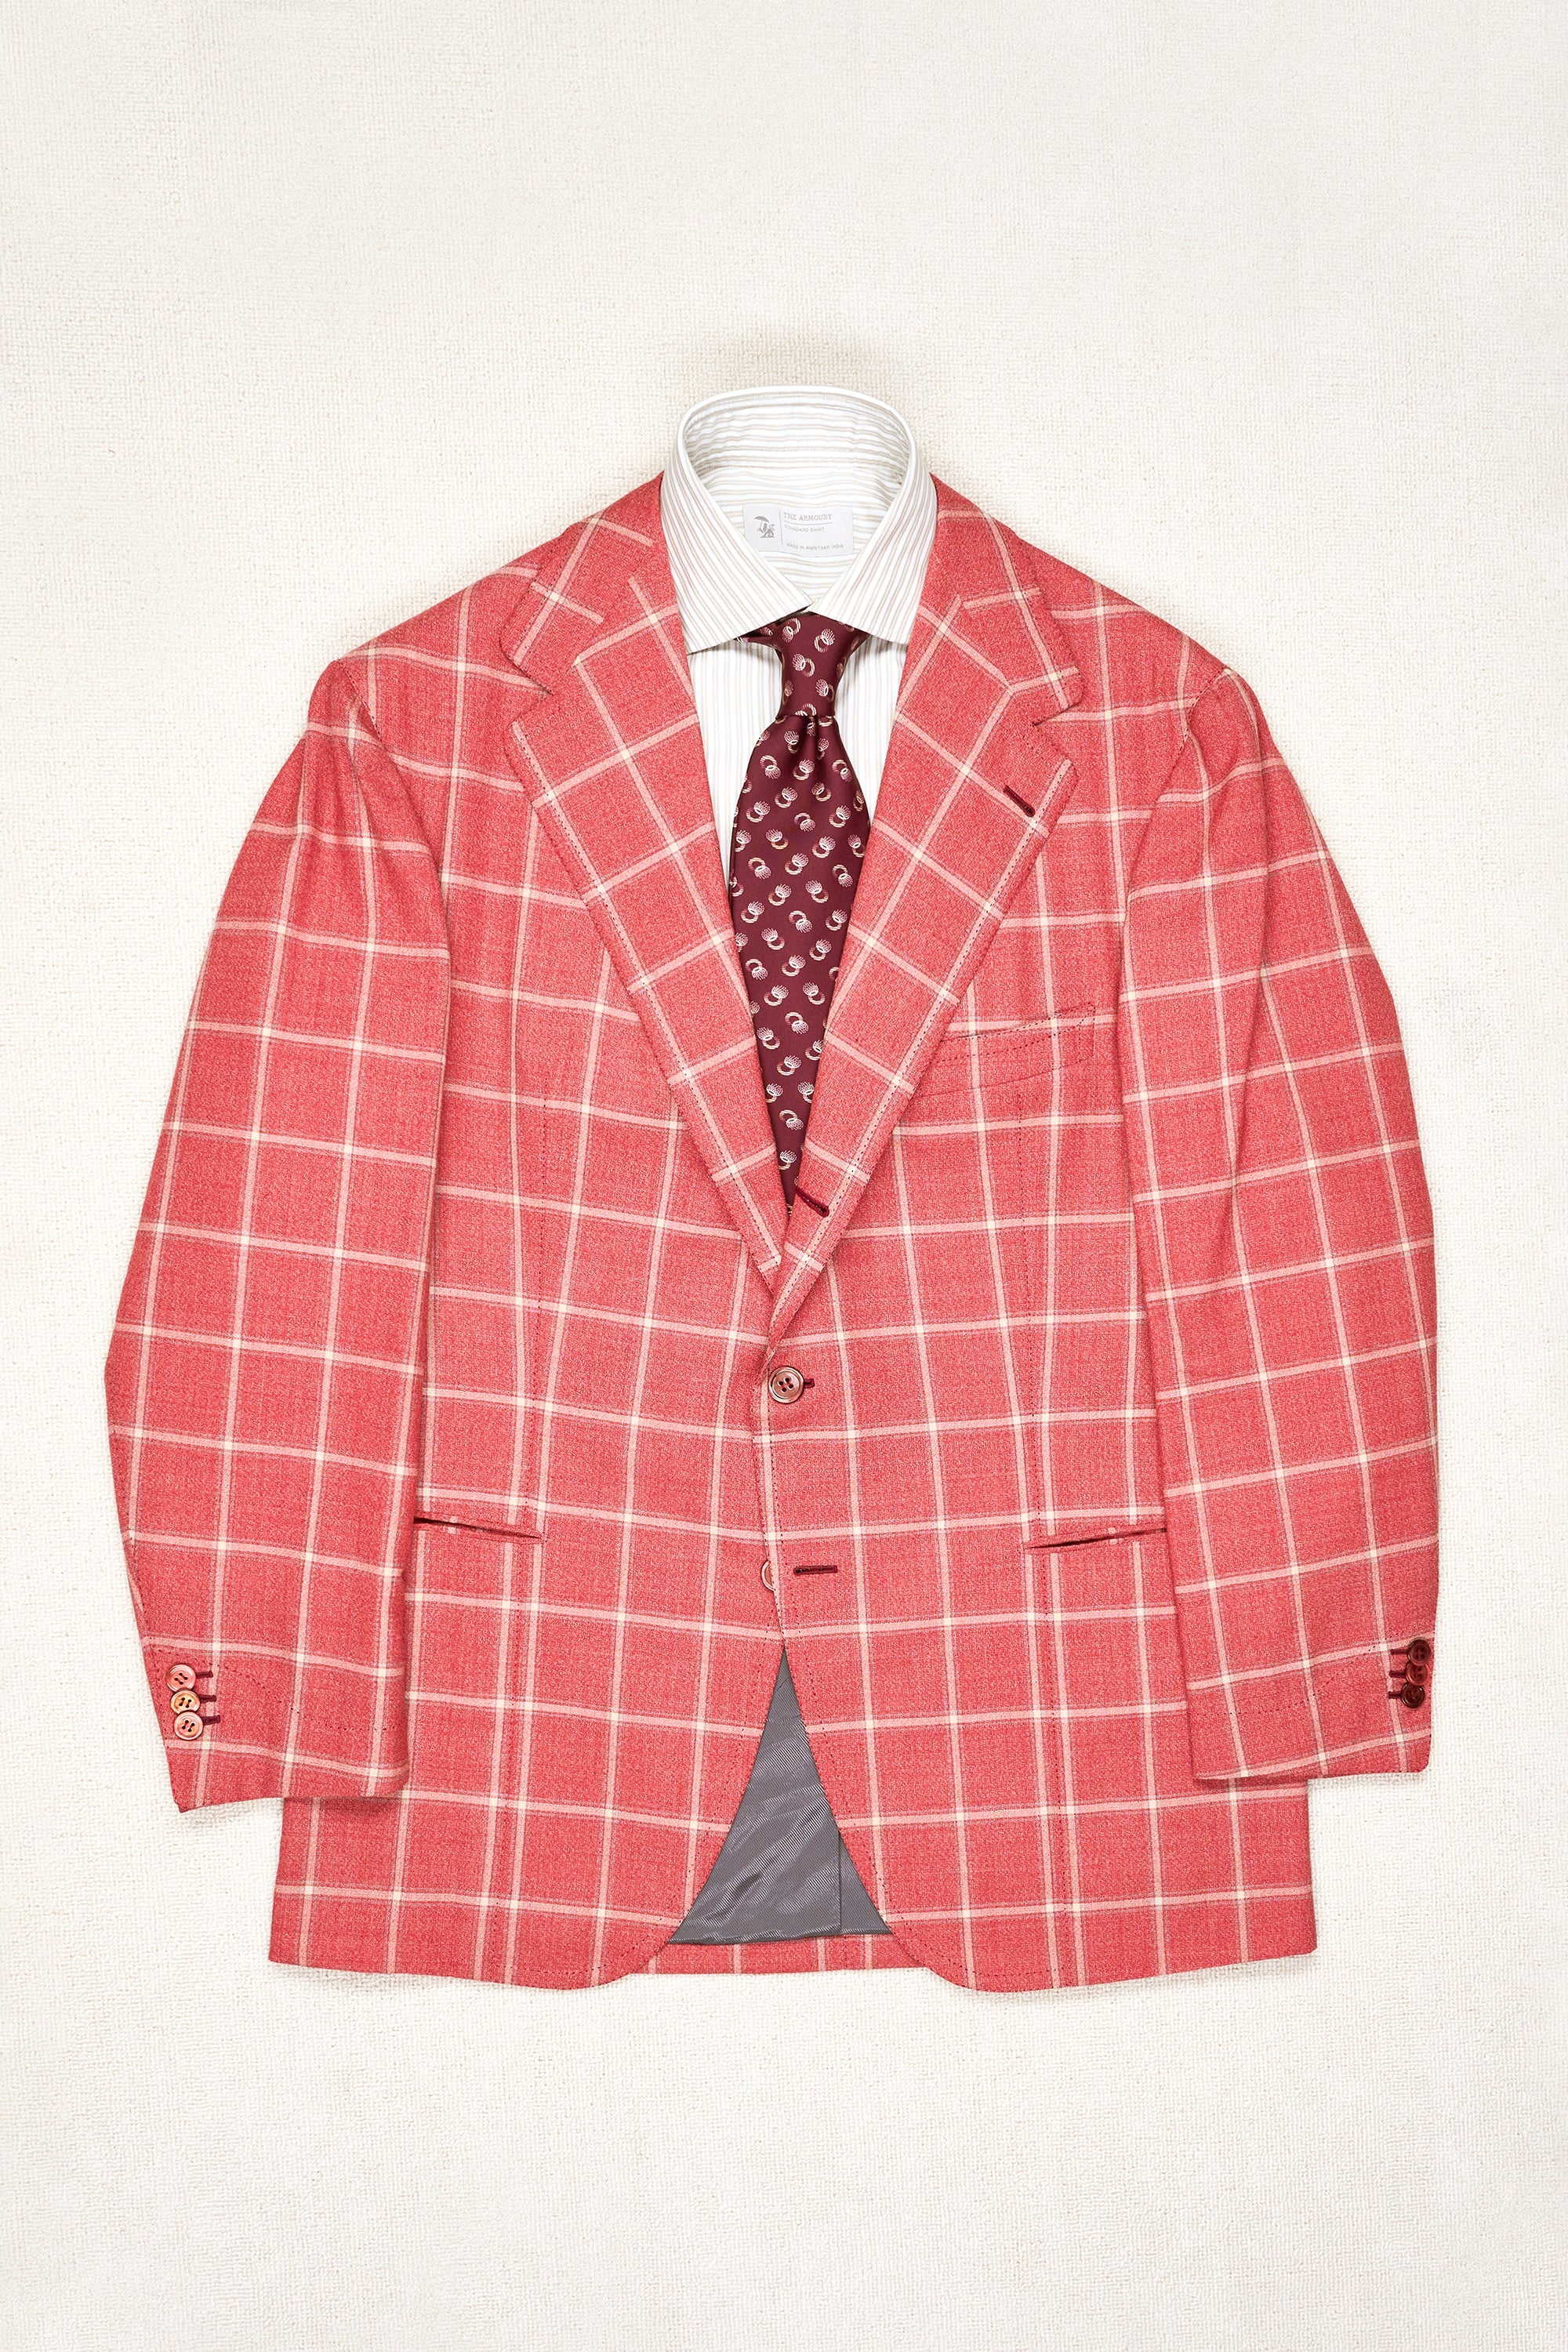 Anglofilo Pink with Beige/Blue Check Wool Sport Coat Bespoke